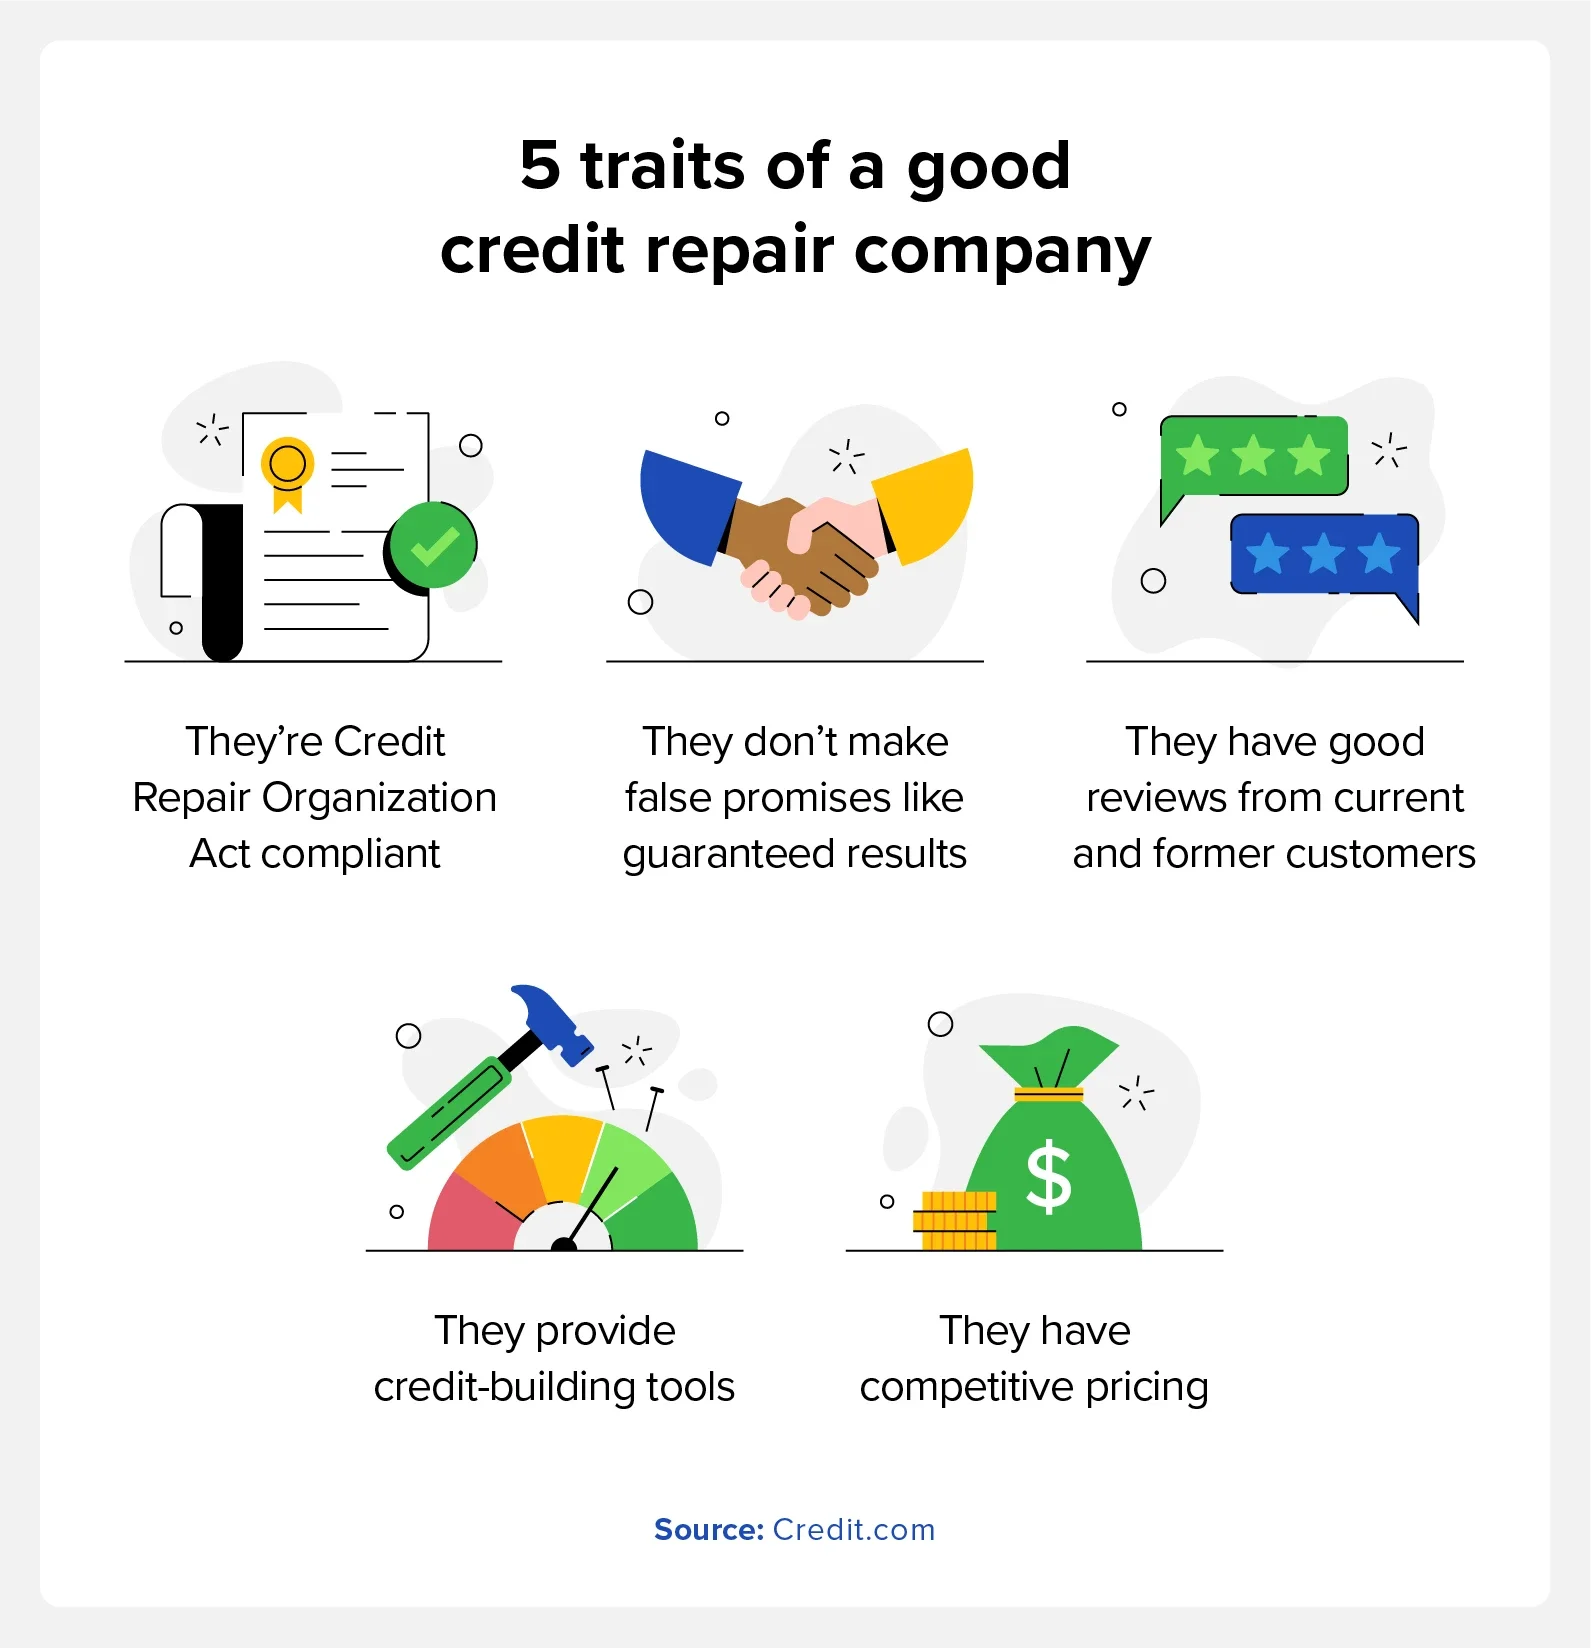 Graphic with the traits of a good credit repair company.